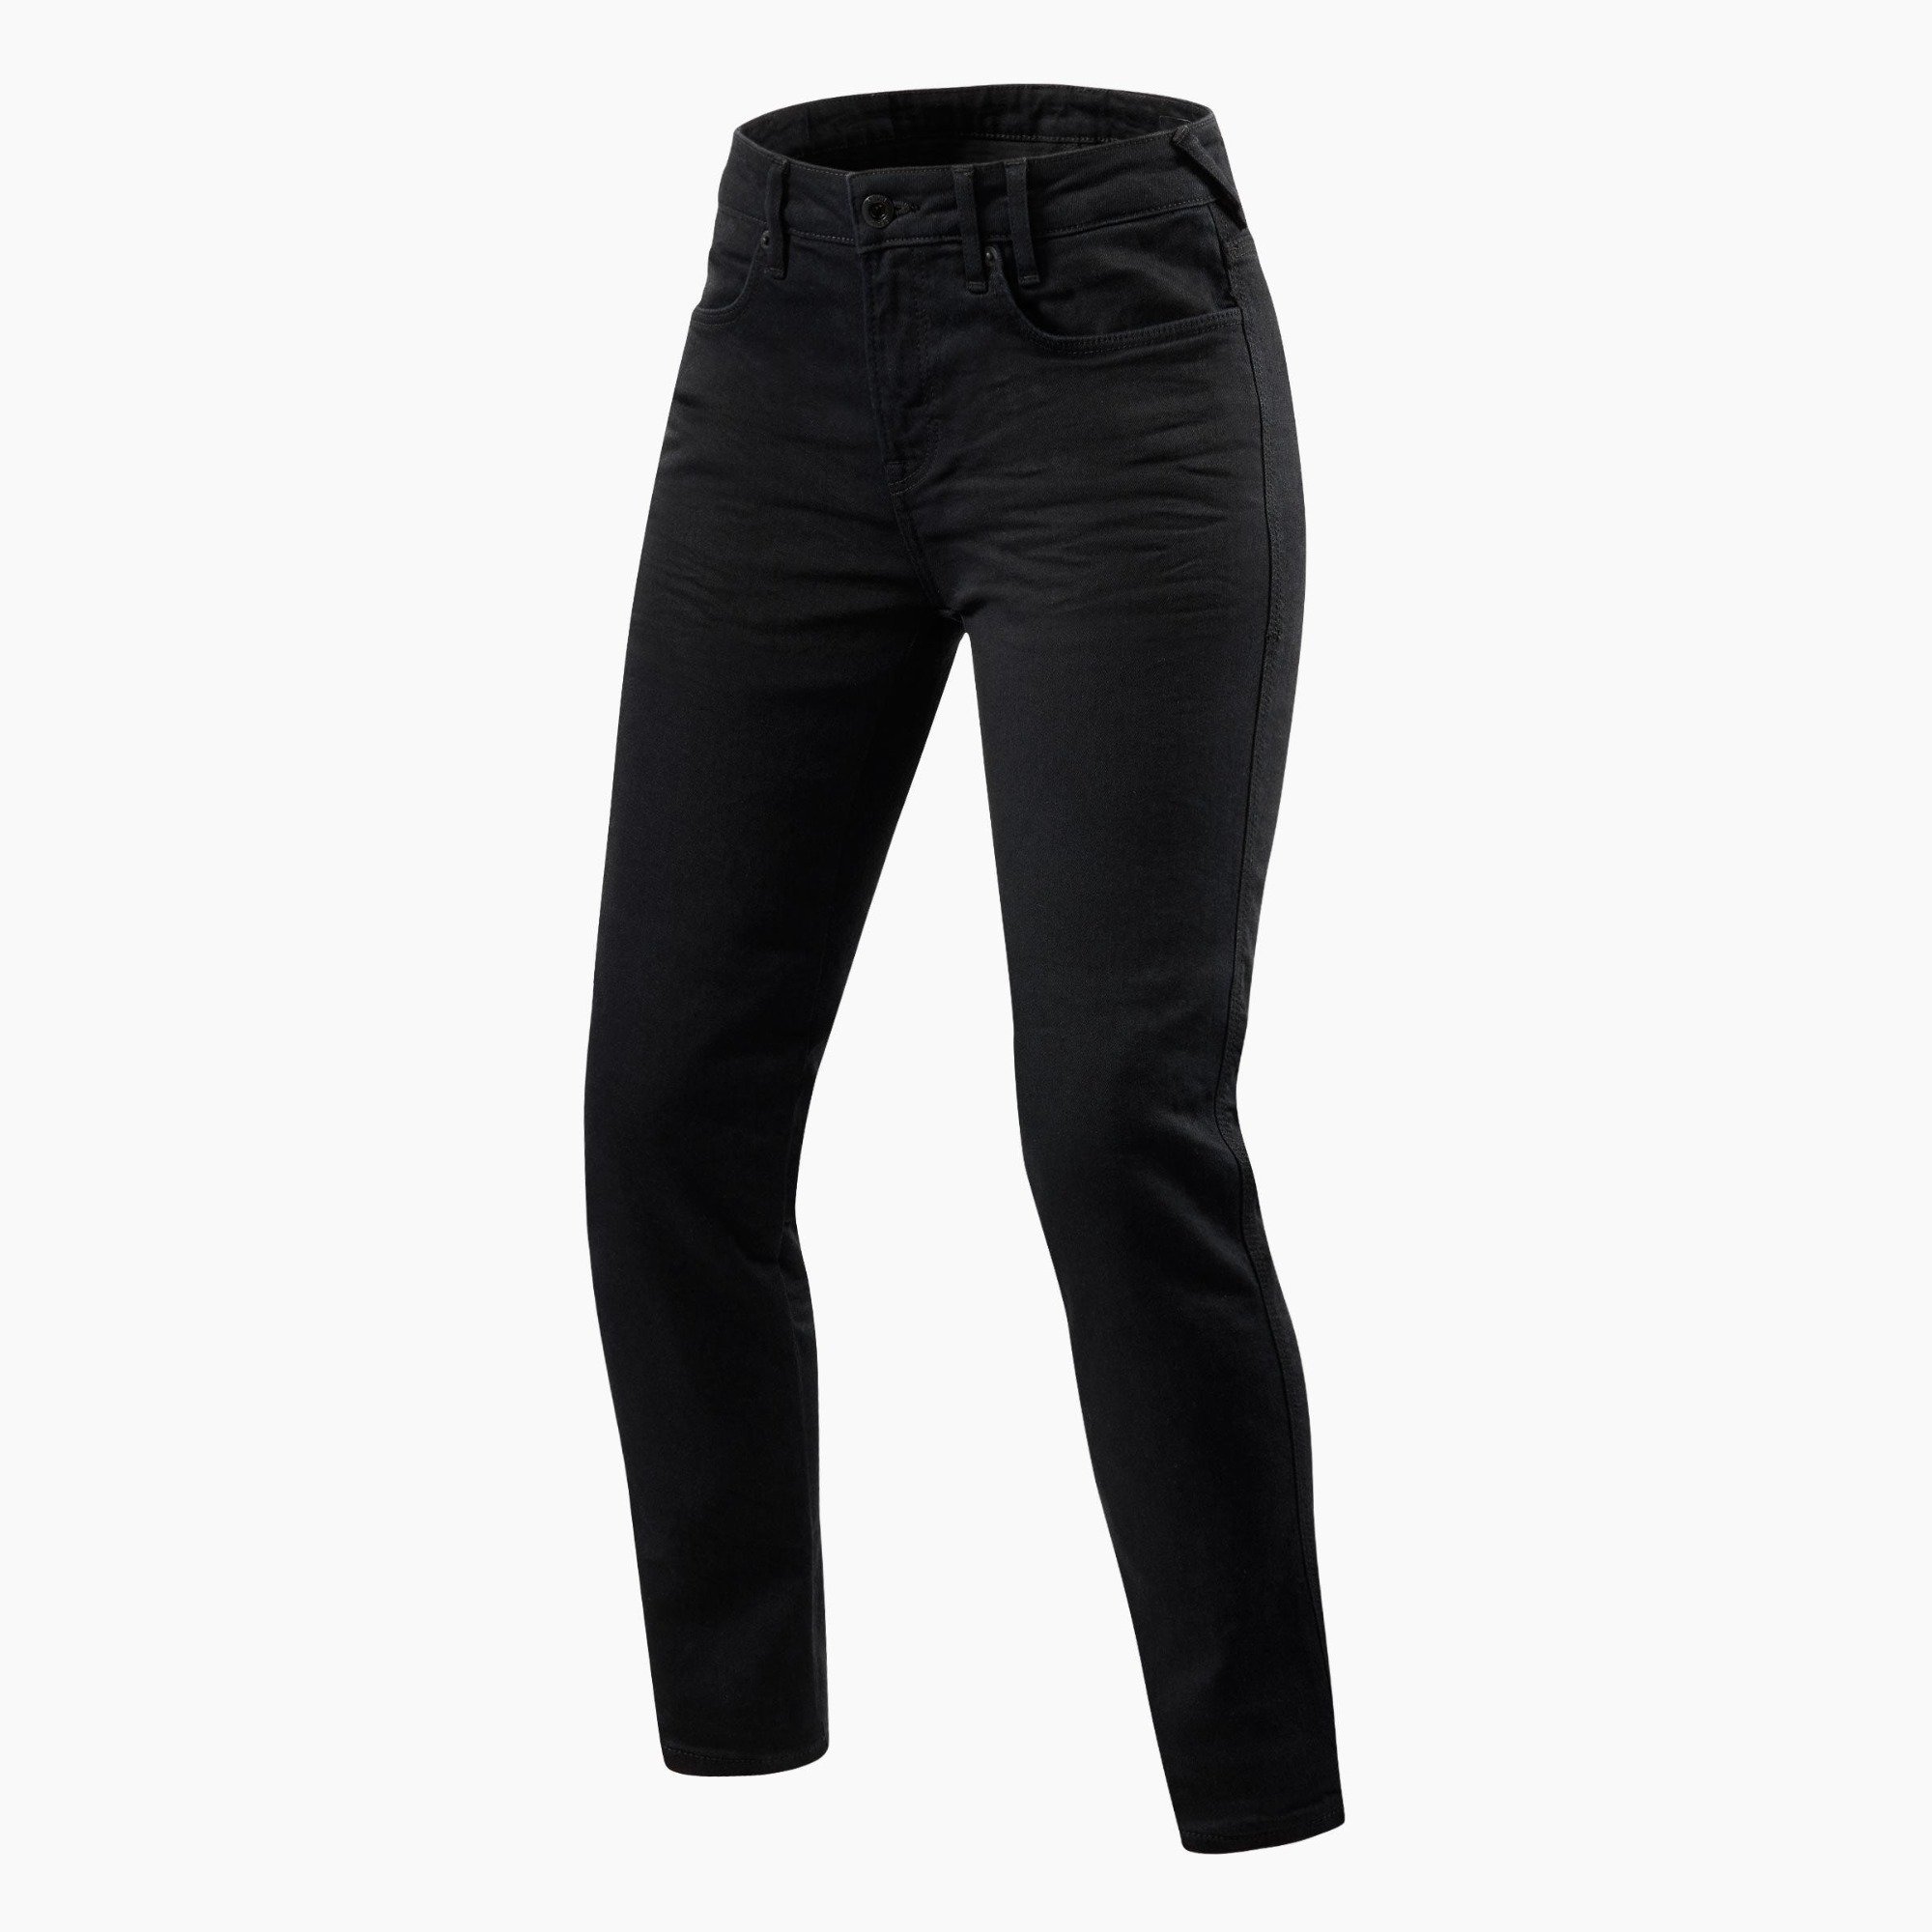 Image of REV'IT! Jeans Maple 2 Ladies SK Black Motorcycle Jeans Size L32/W29 ID 8700001342230